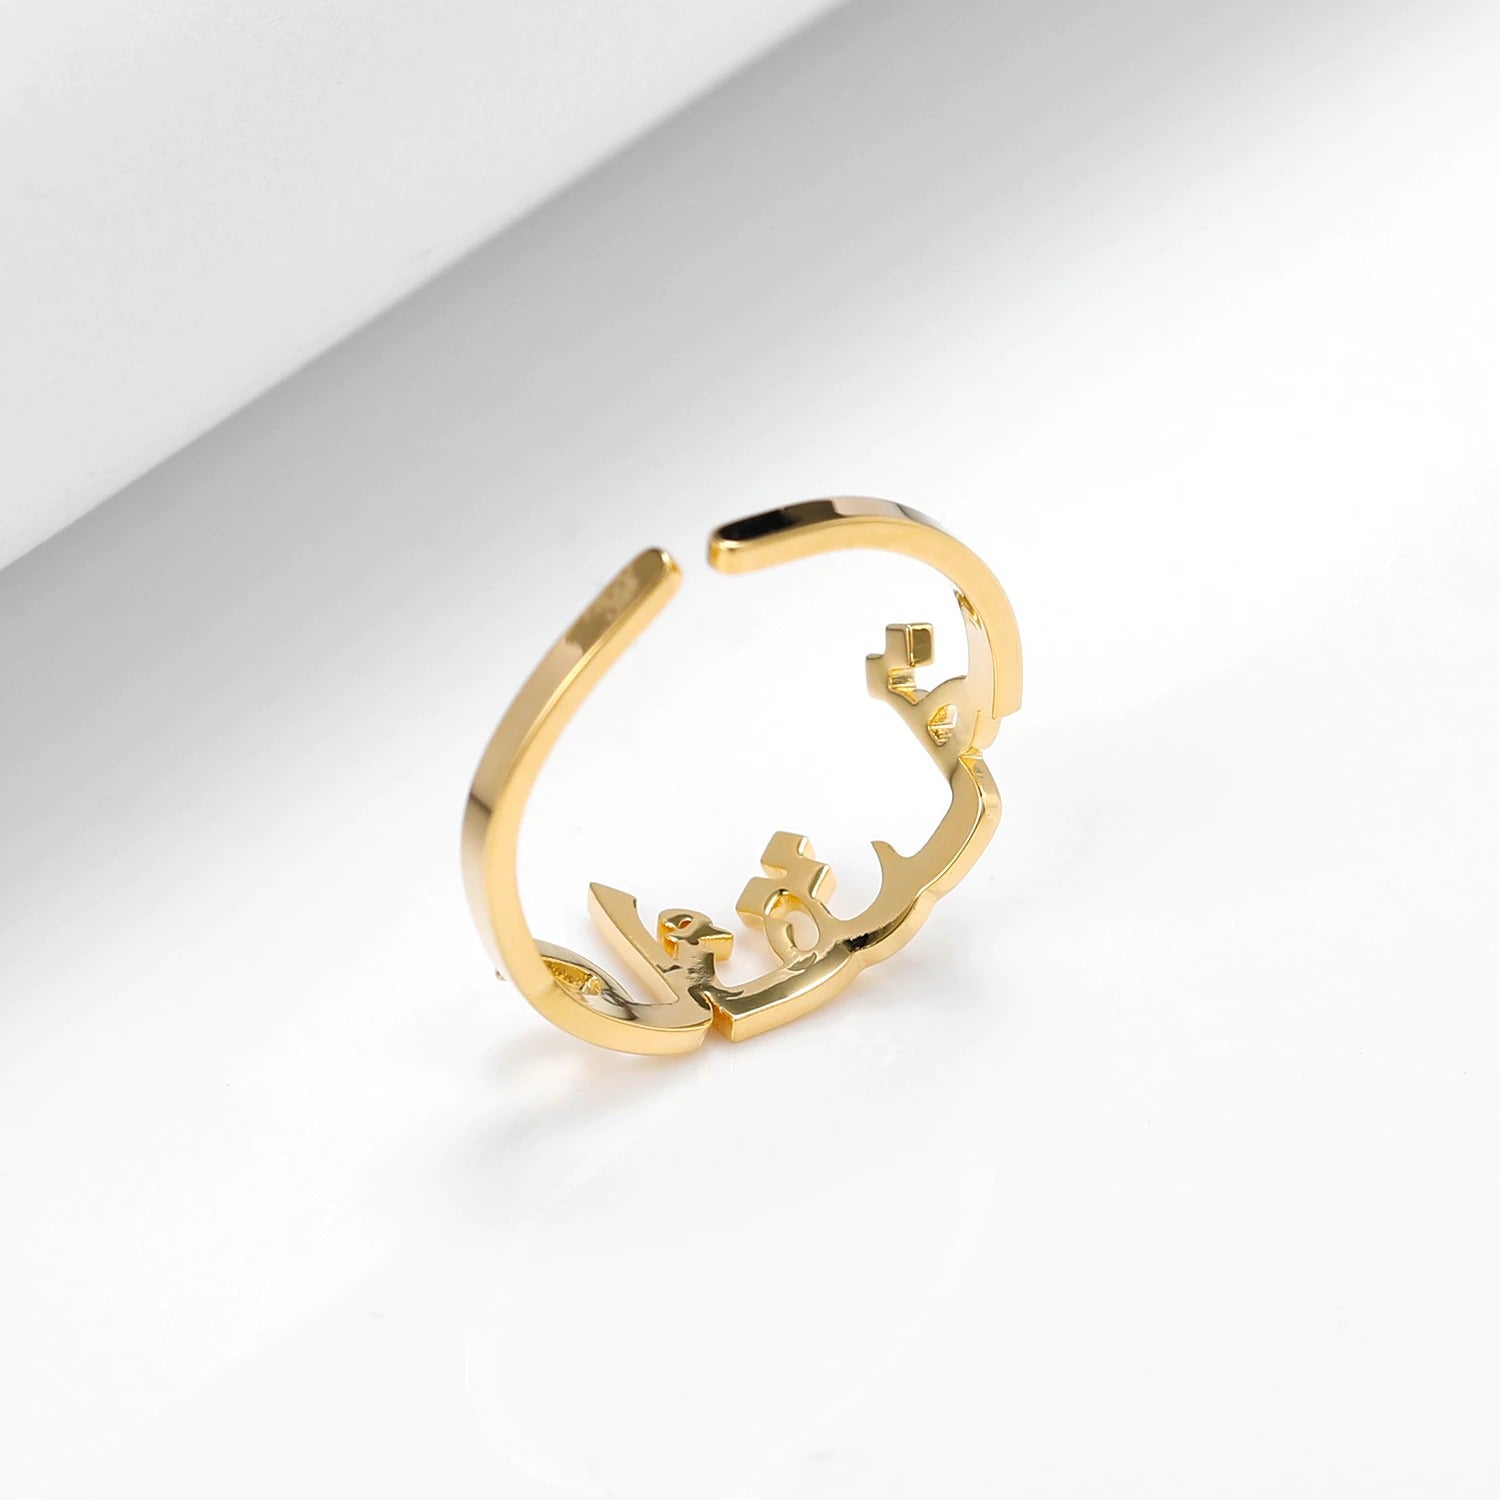 Buy 22k Arabic Allure Gold Ring Online from Vaibhav Jewellers